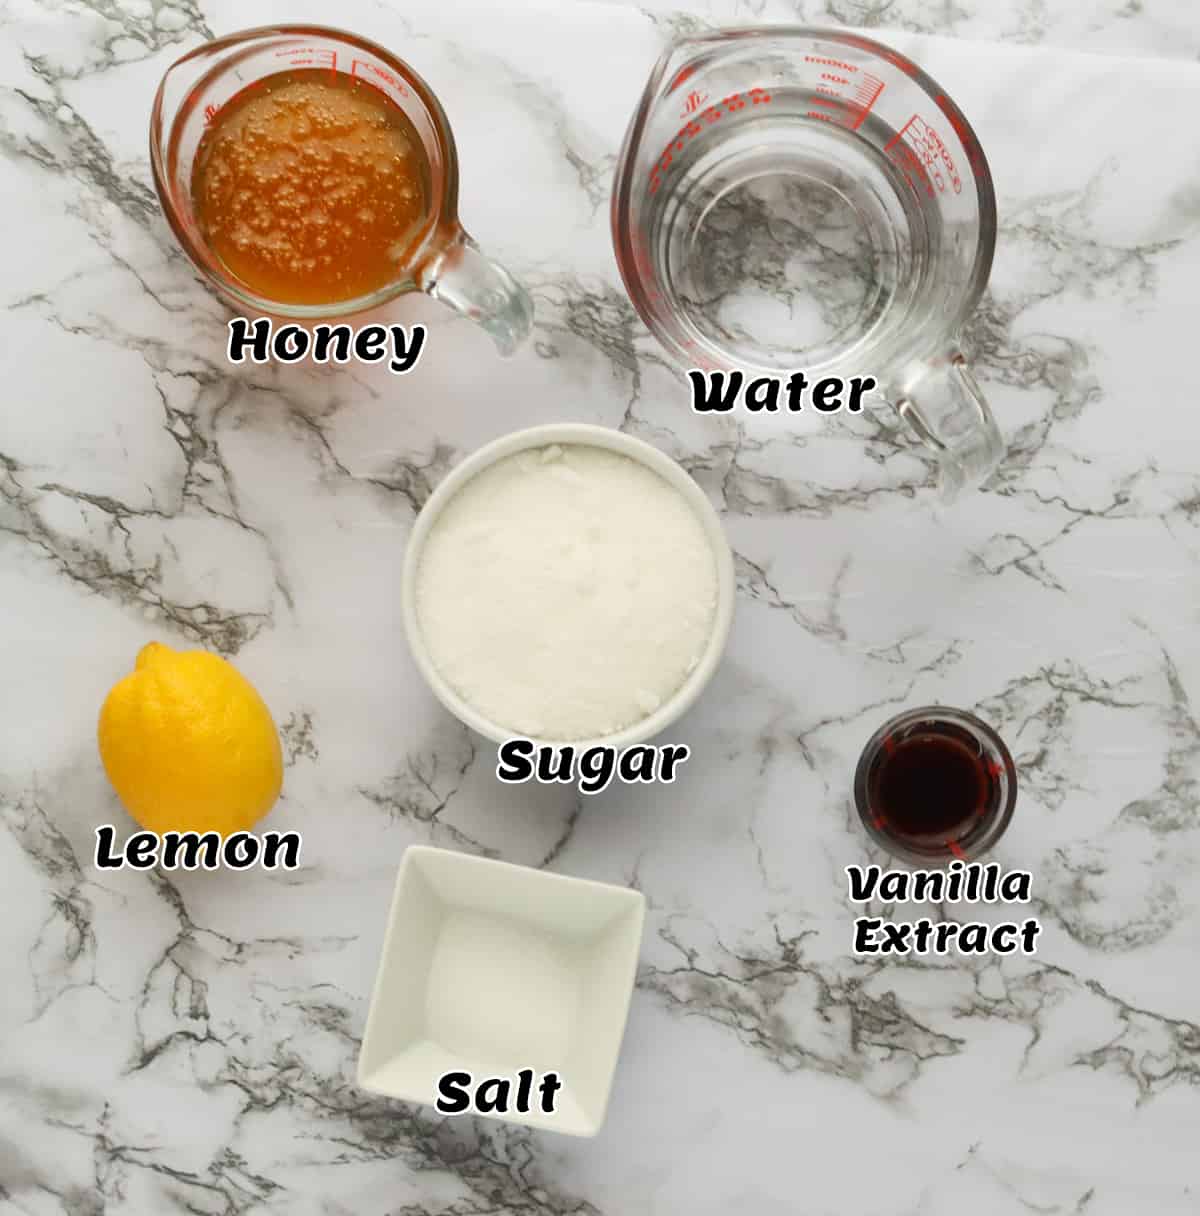 What you need to make the syrup